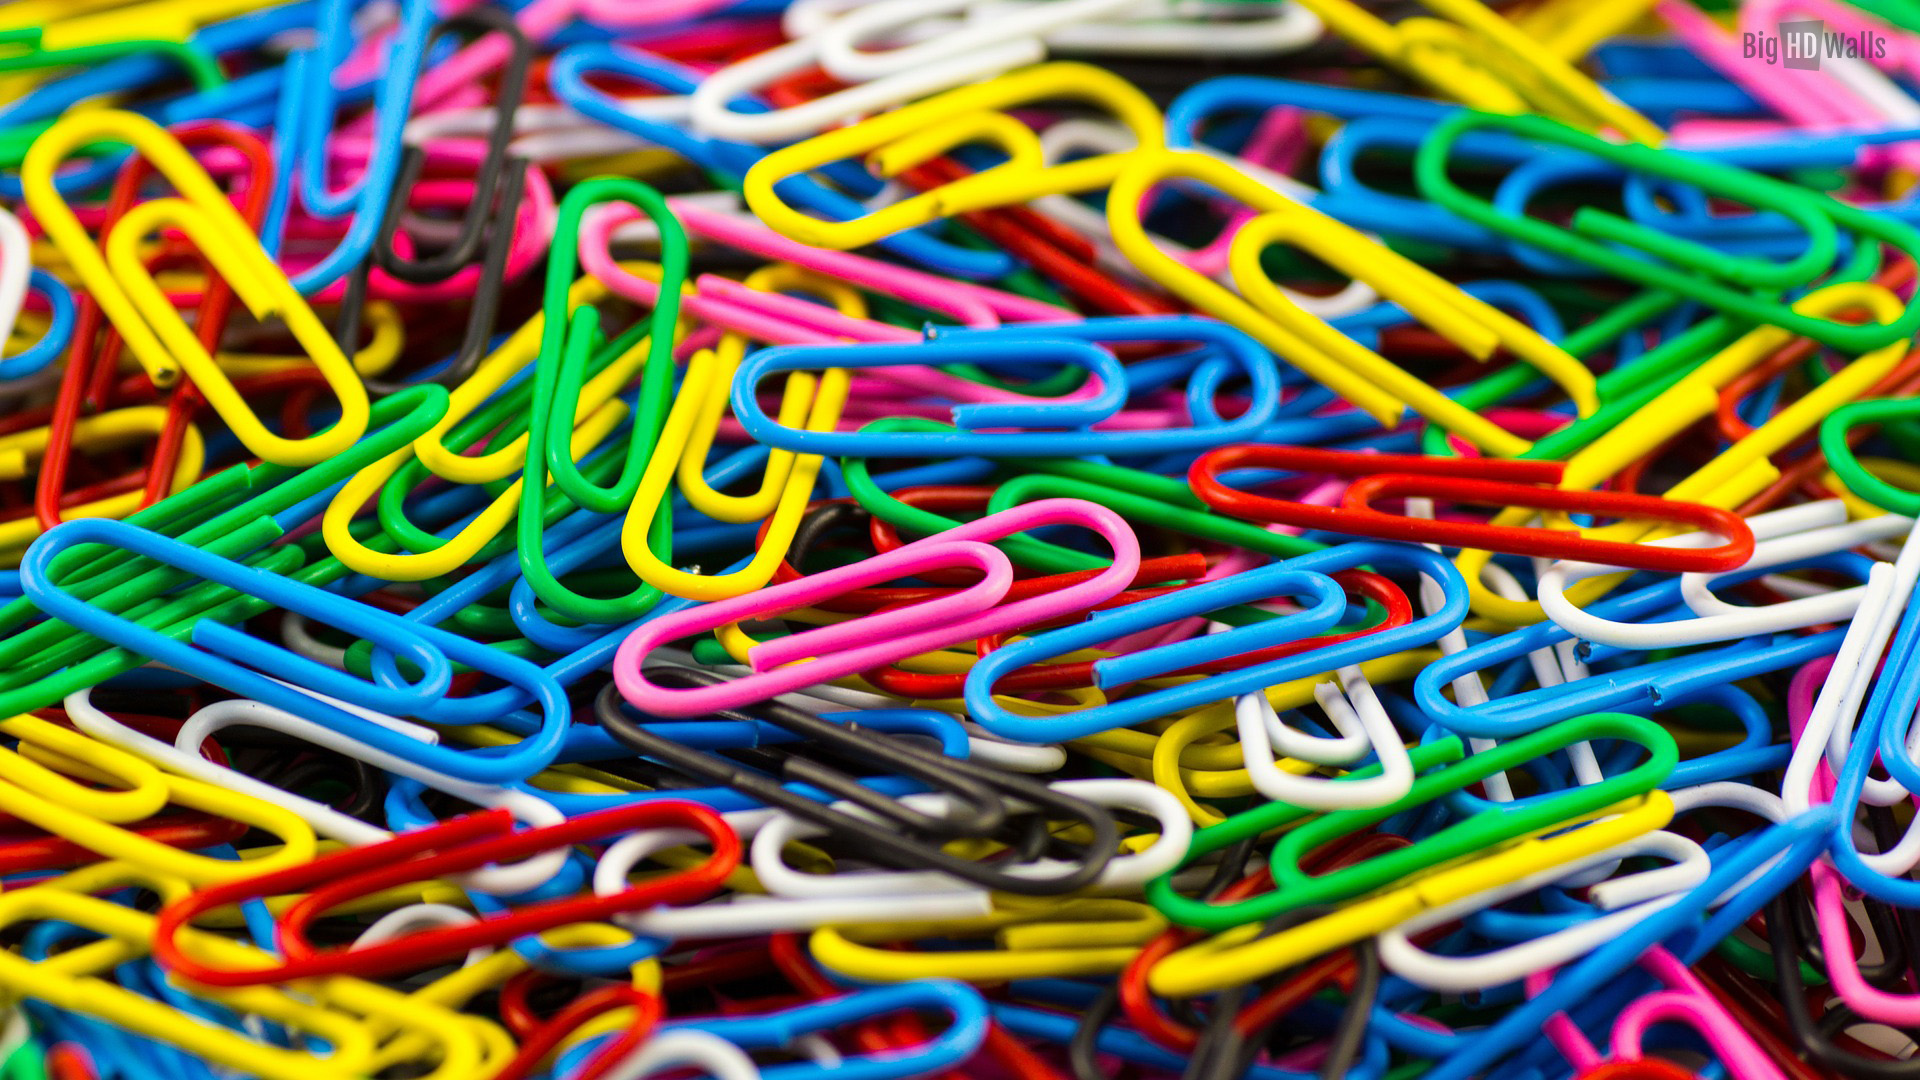 clips colorful hd wallpaper001 1920x1080